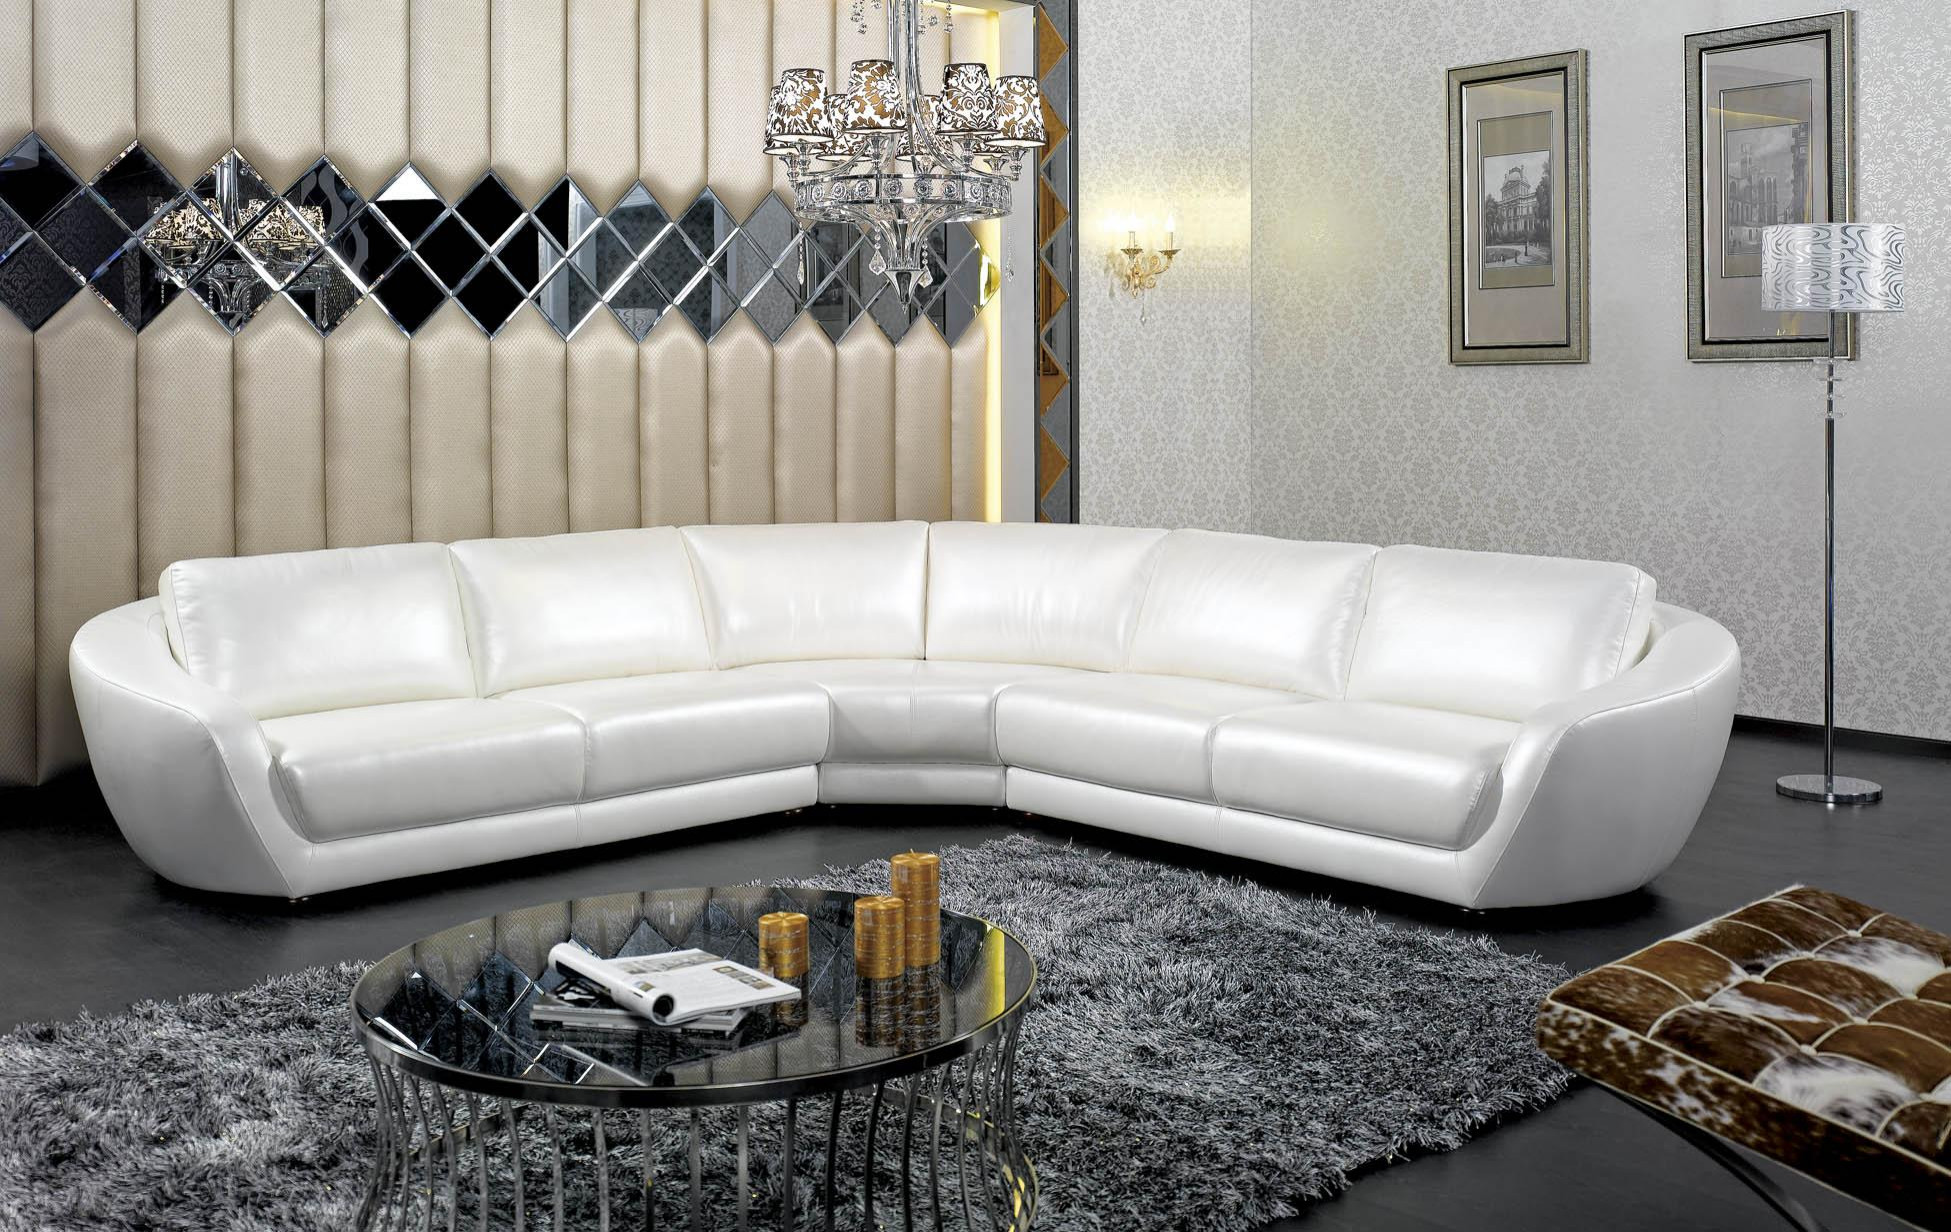 White Leather Couch Photos Ideas